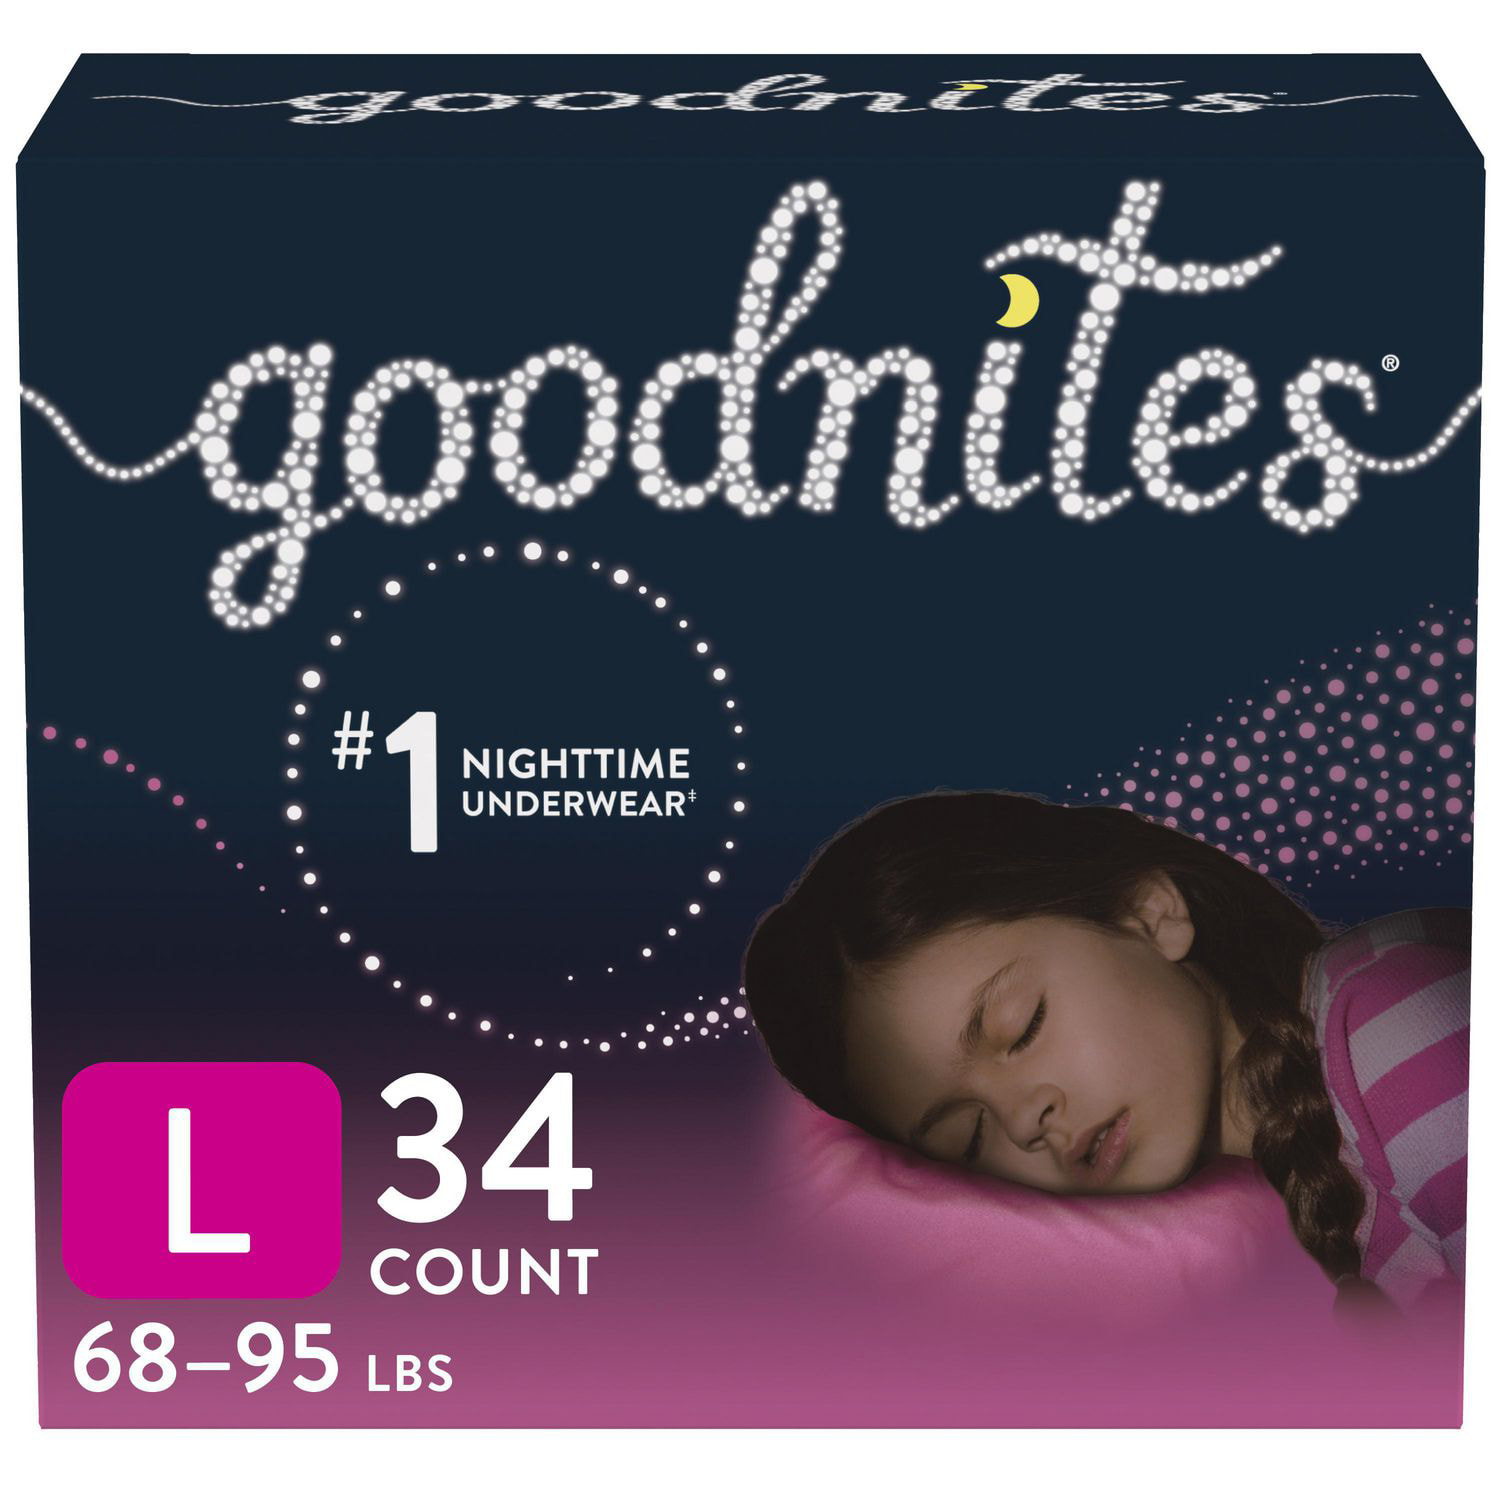 GoodNites TRU-FIT Disposable Absorbent Inserts for Boys & Girls